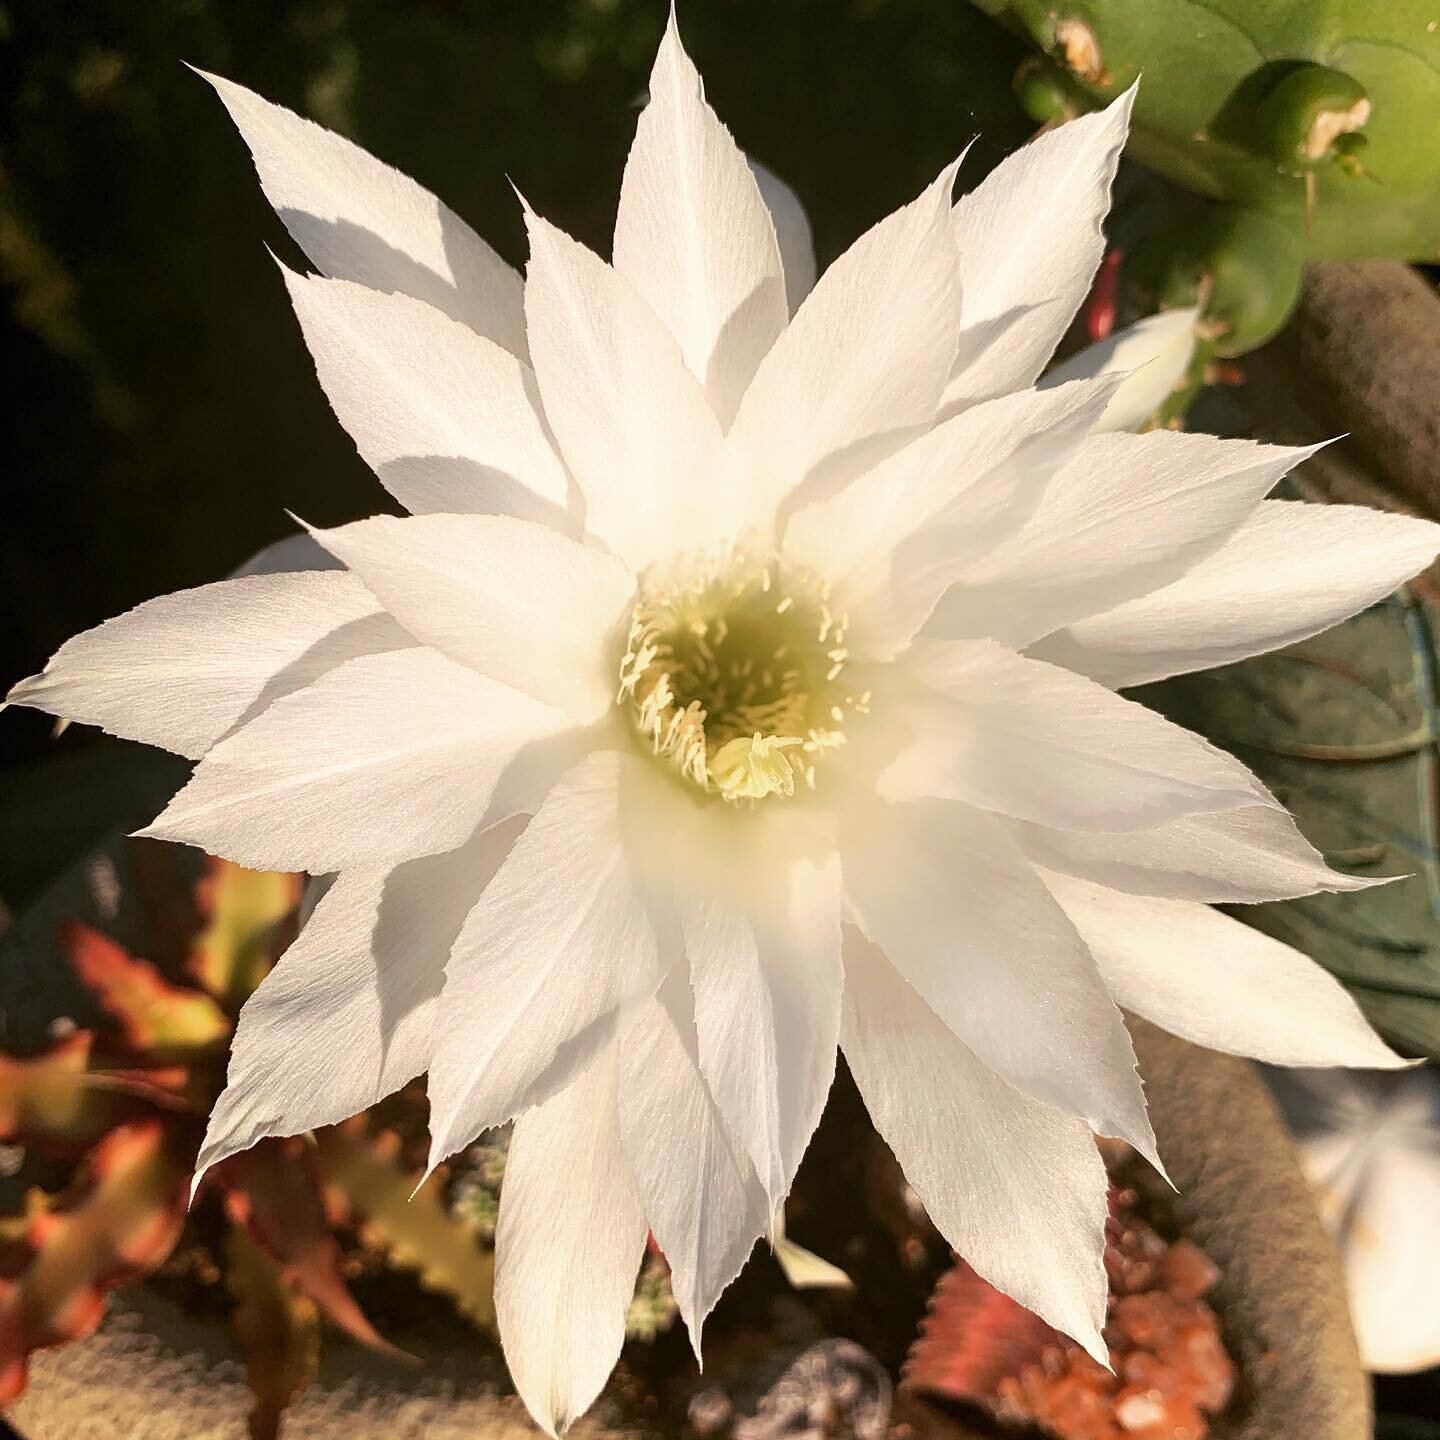 She bloomed by moonlight. So elusive is the cactus flower with her exquisite scent beyond description. So very fleeting. If only I could capture her beauty and fragrance in a bottle...pure intoxication! 
@flauraskinandhair 
.
.
.
#cactusflower #fullm